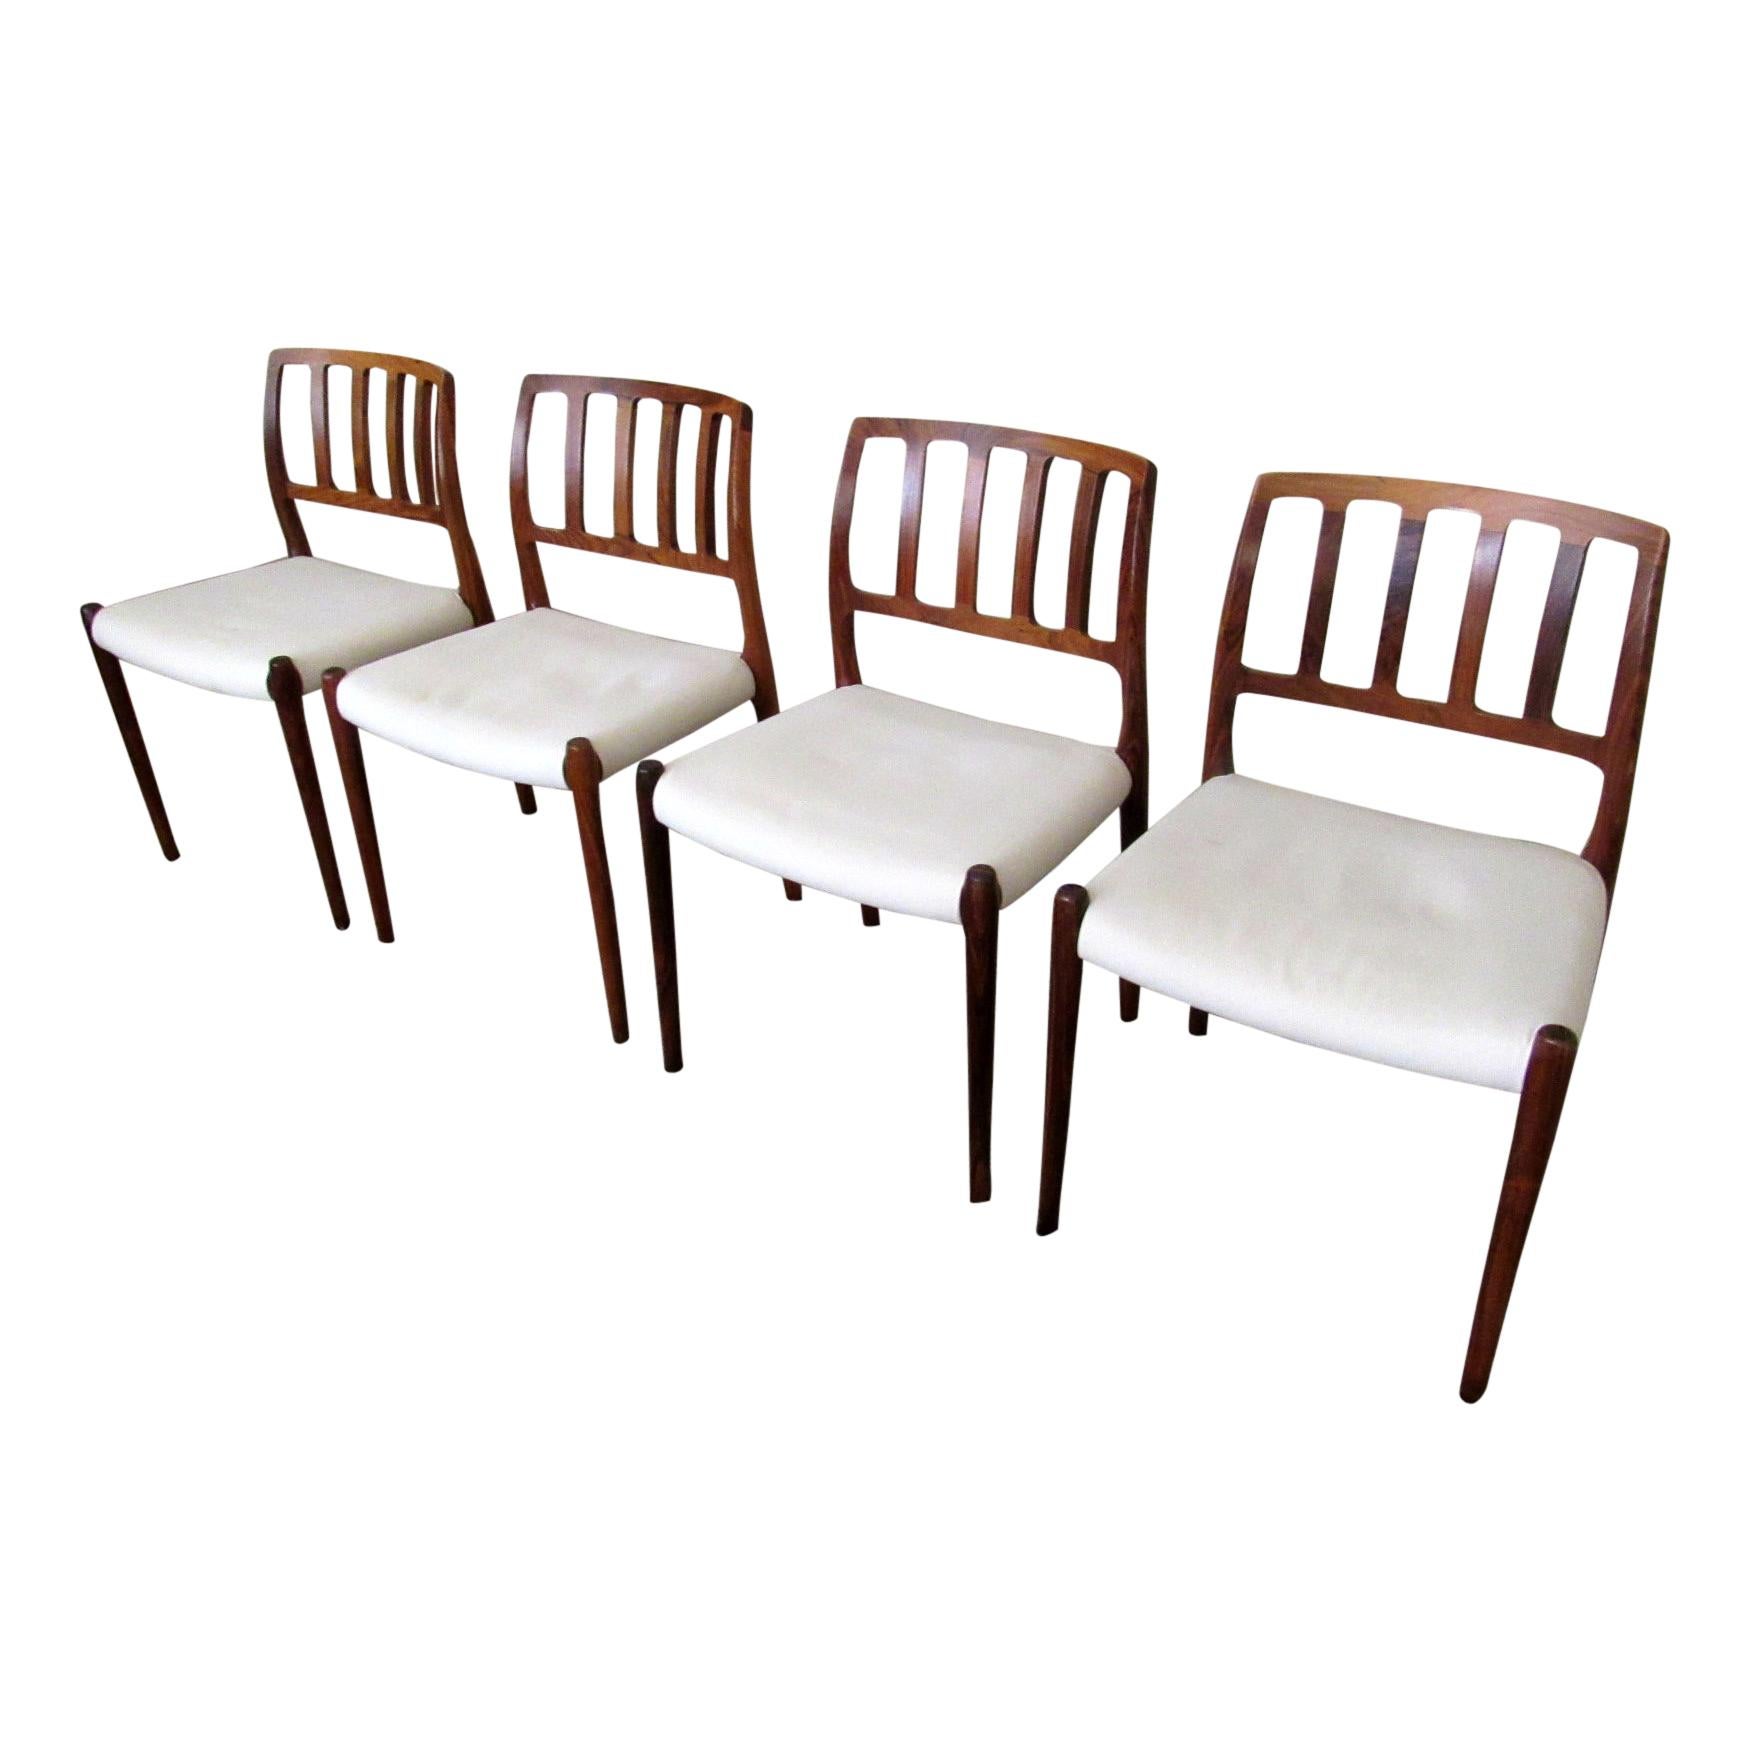 A four-piece set of “Model 83” upholstered rosewood dining chairs designed by Niels Otto Møller for J.L. Møller. Timeless Danish design features solid rosewood frame with smoothly sculpted back and front legs. Branded on the underside with maker’s